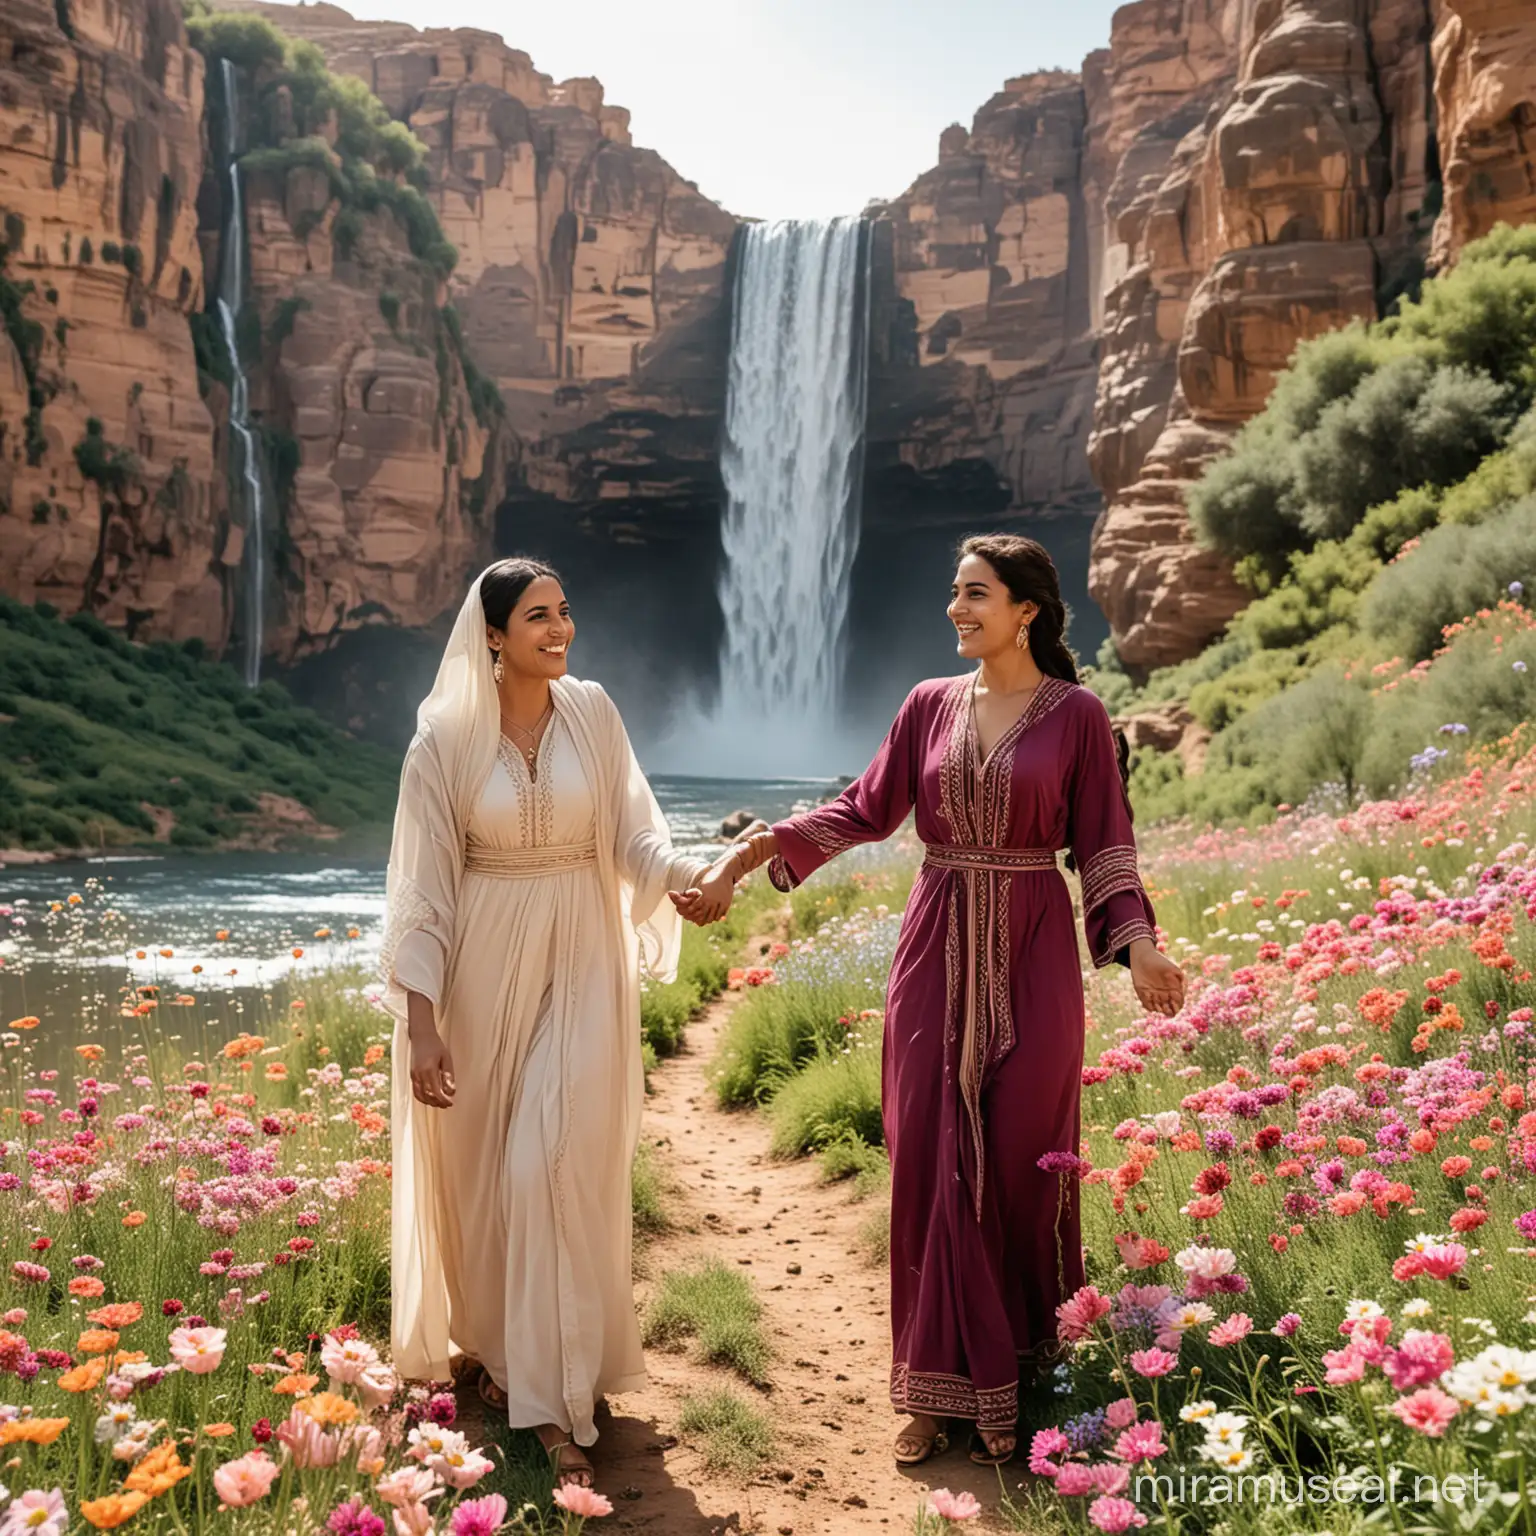 Multicultural Friendship Smiling Arab and African Women in Flower Field with Waterfall